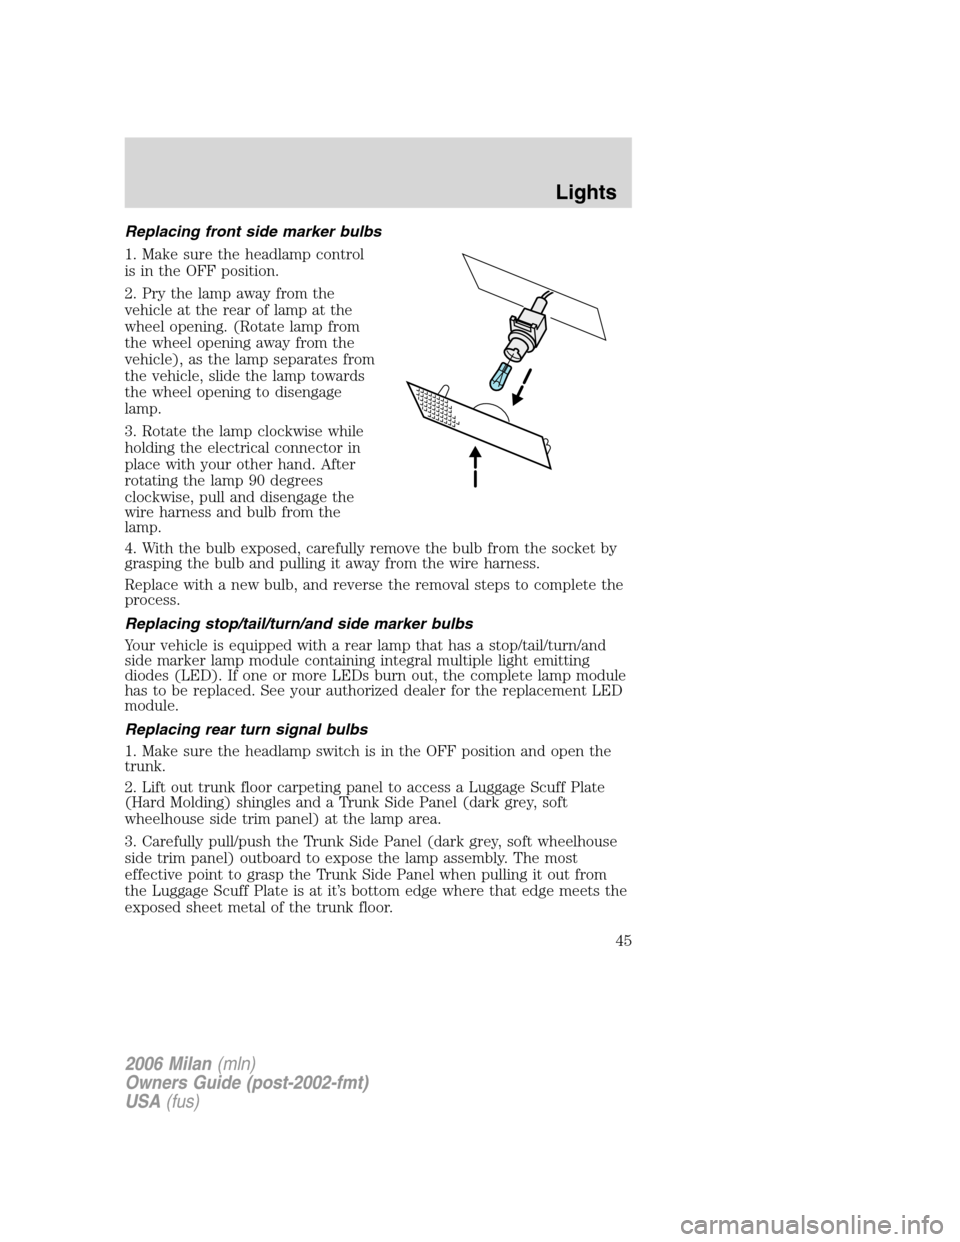 Mercury Milan 2006  s Service Manual Replacing front side marker bulbs
1. Make sure the headlamp control
is in the OFF position.
2. Pry the lamp away from the
vehicle at the rear of lamp at the
wheel opening. (Rotate lamp from
the wheel 